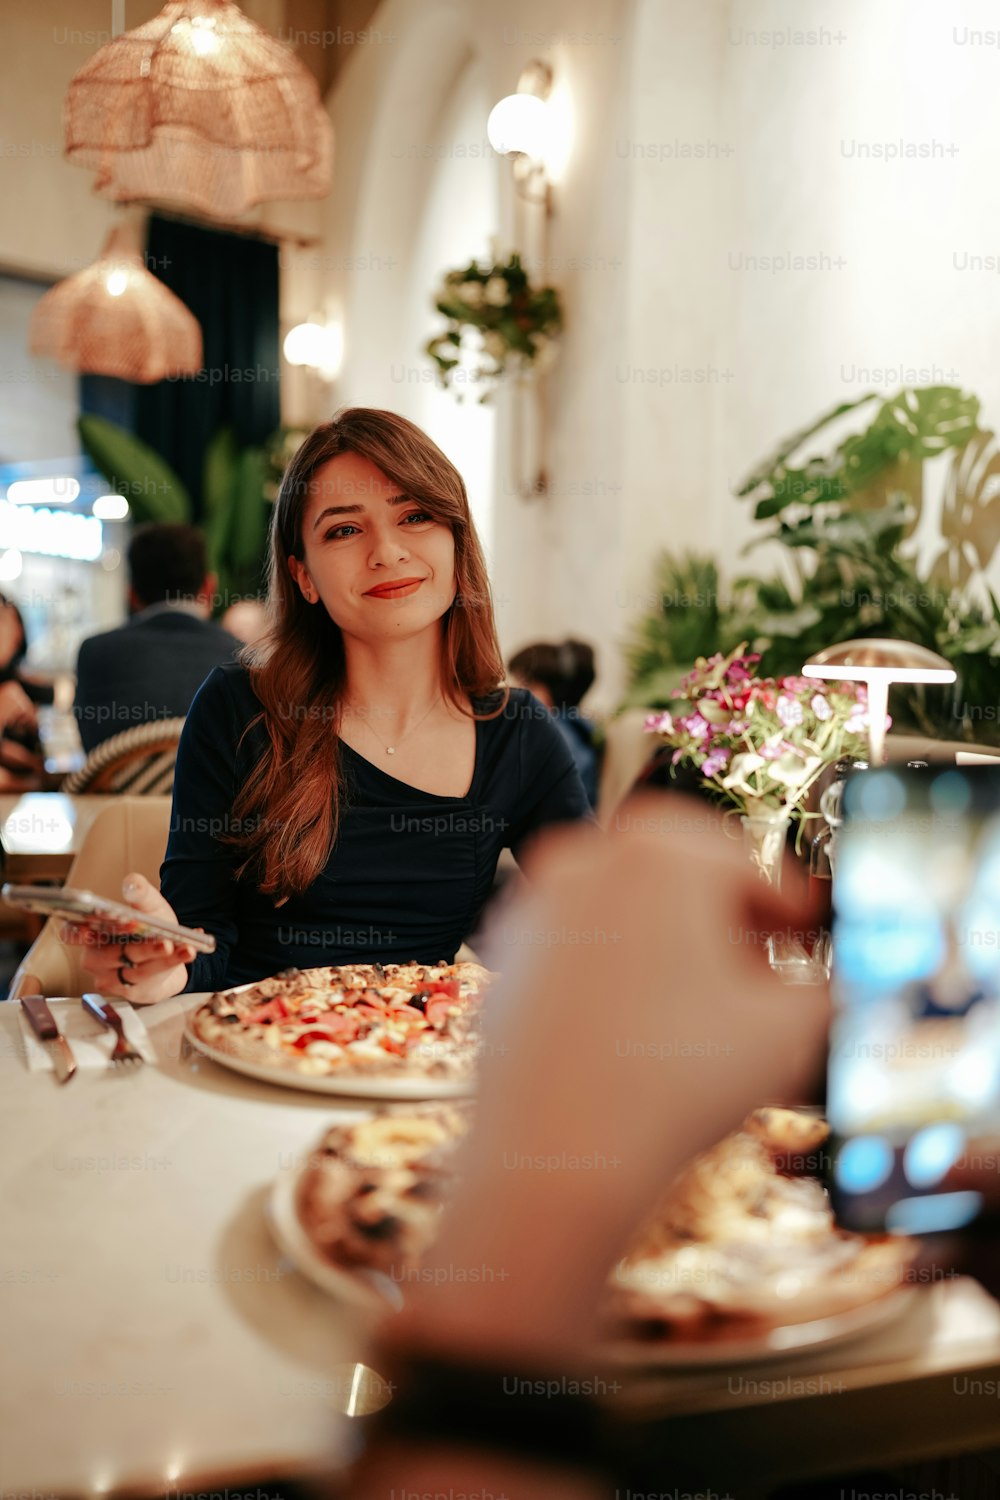 a woman sitting at a table with a plate of pizza